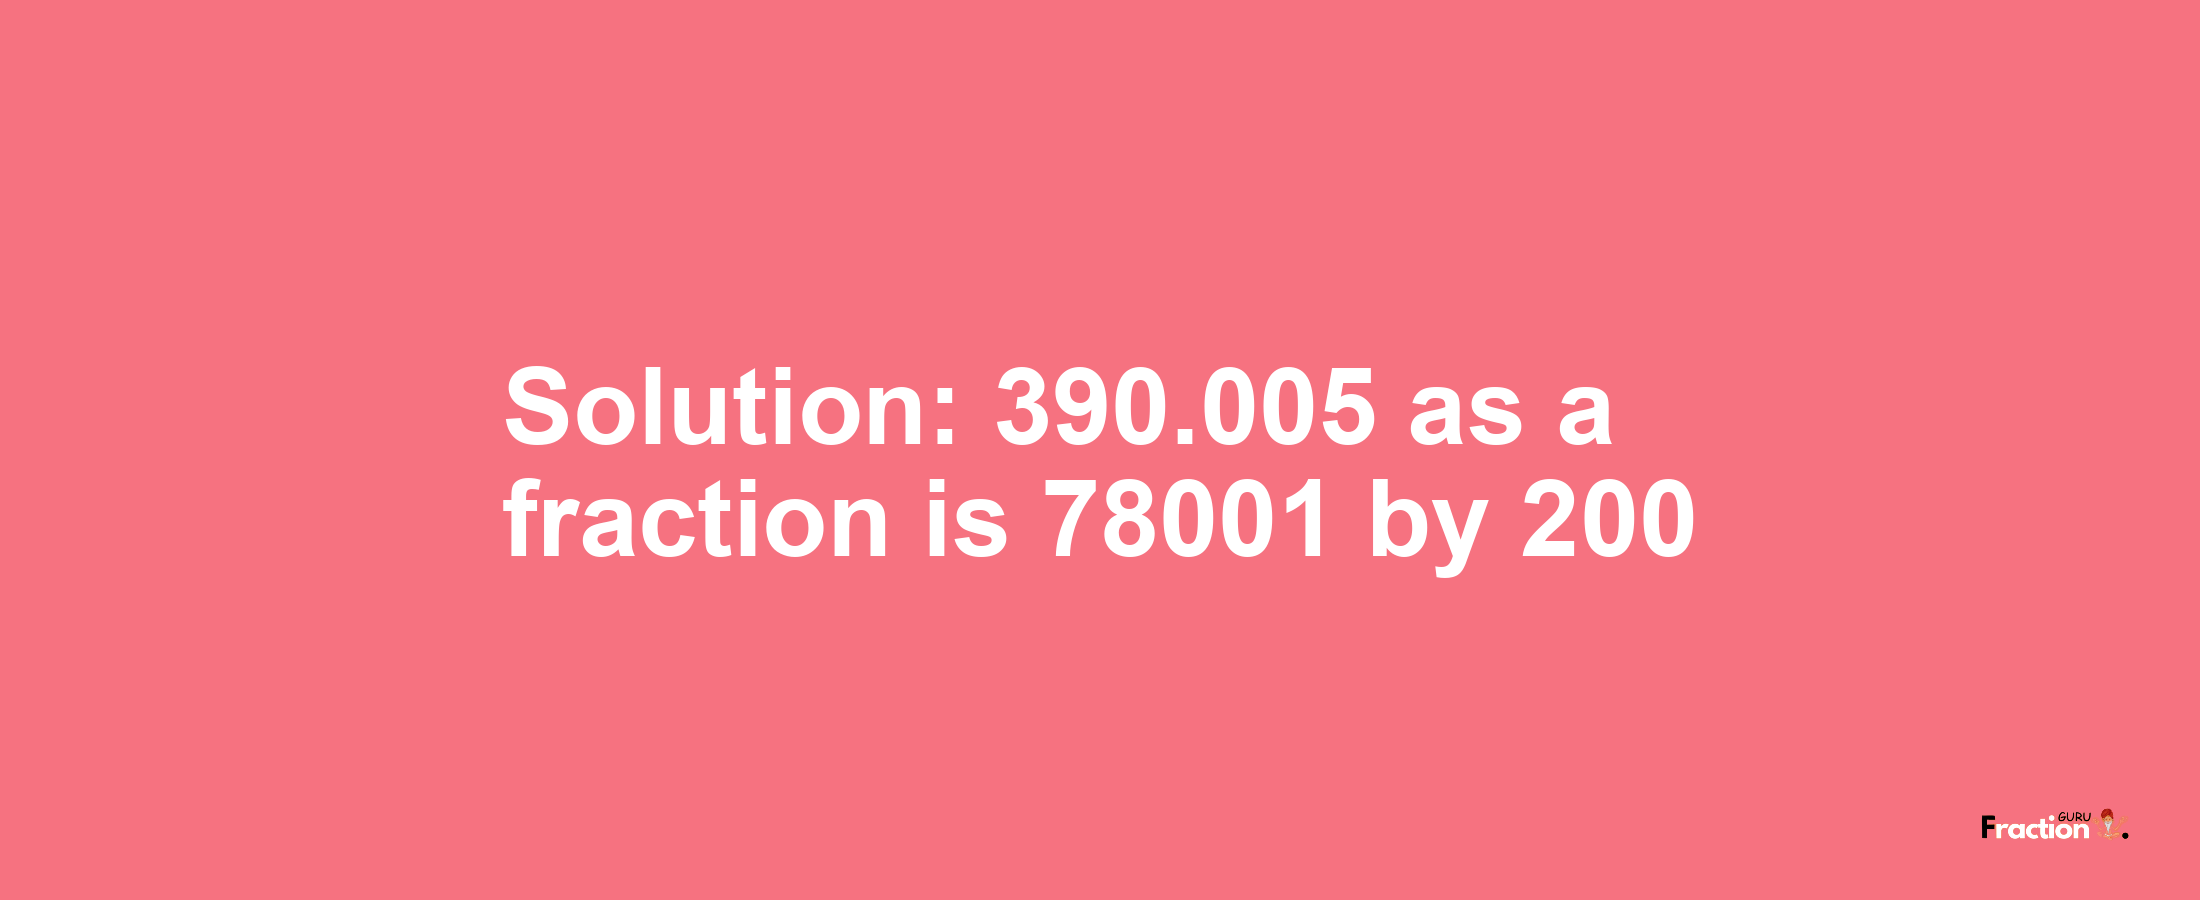 Solution:390.005 as a fraction is 78001/200